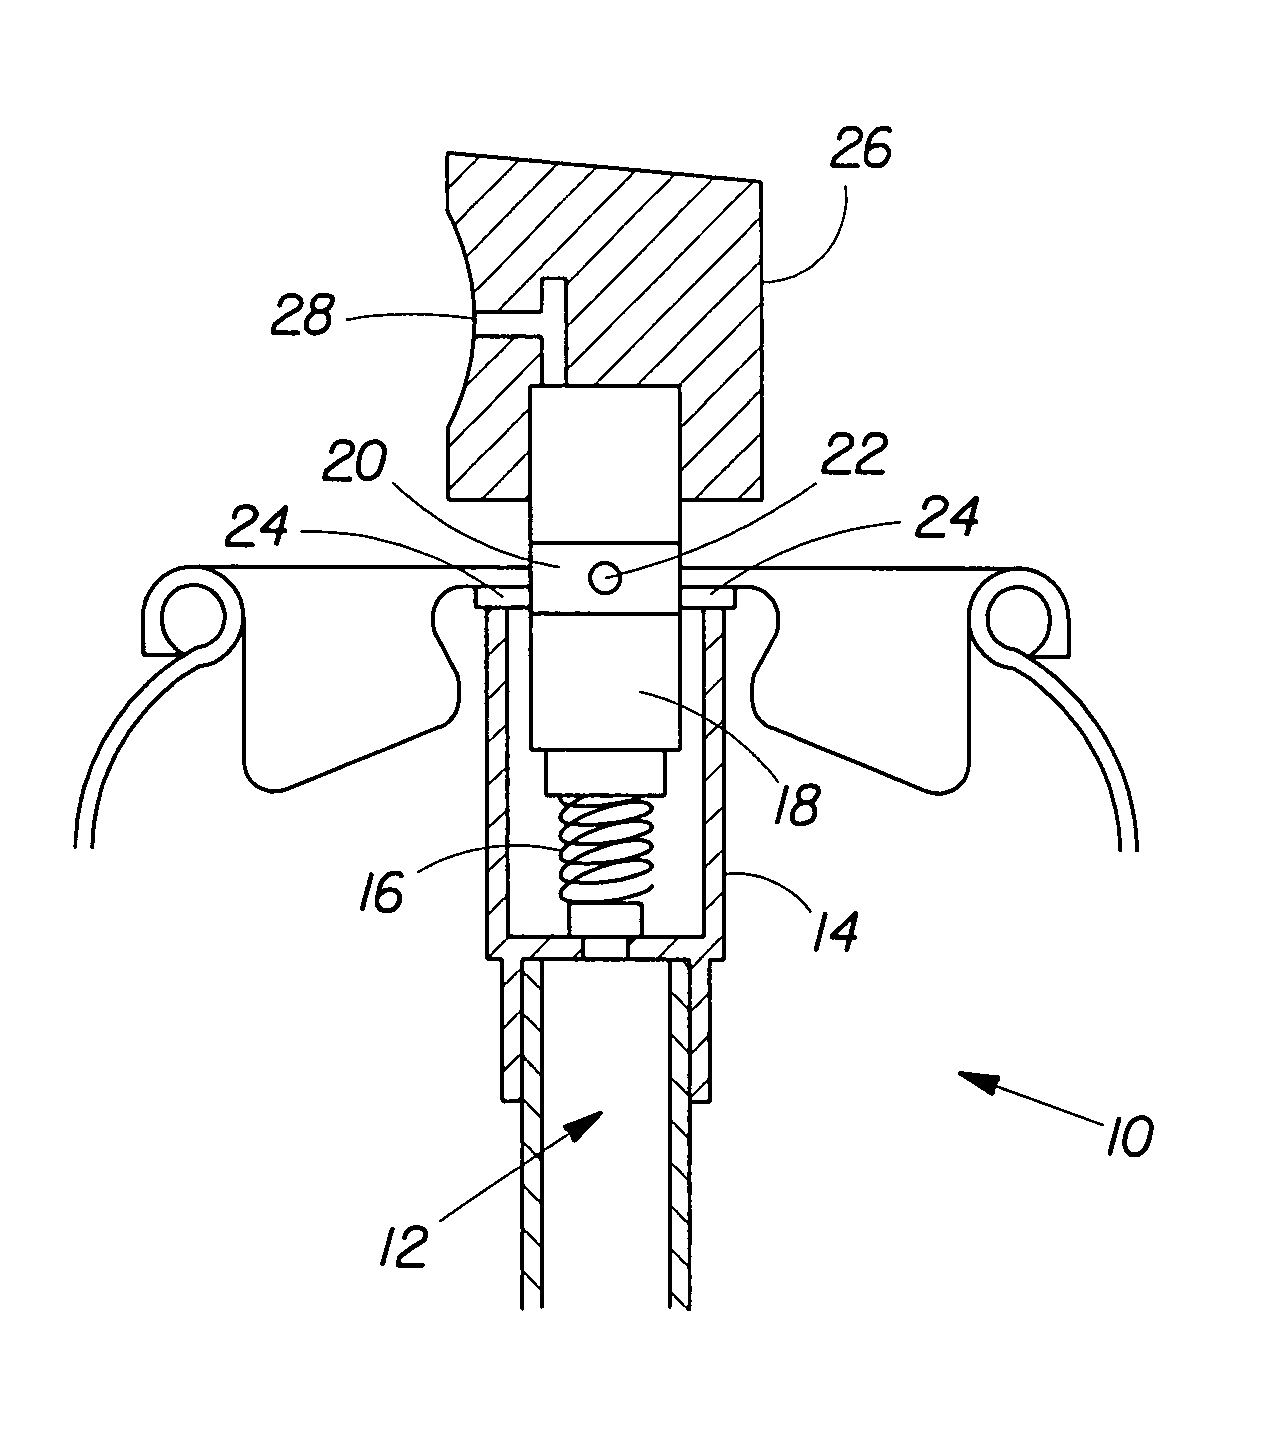 Aerosol product comprising a foaming concentrate composition comprising particulate materials